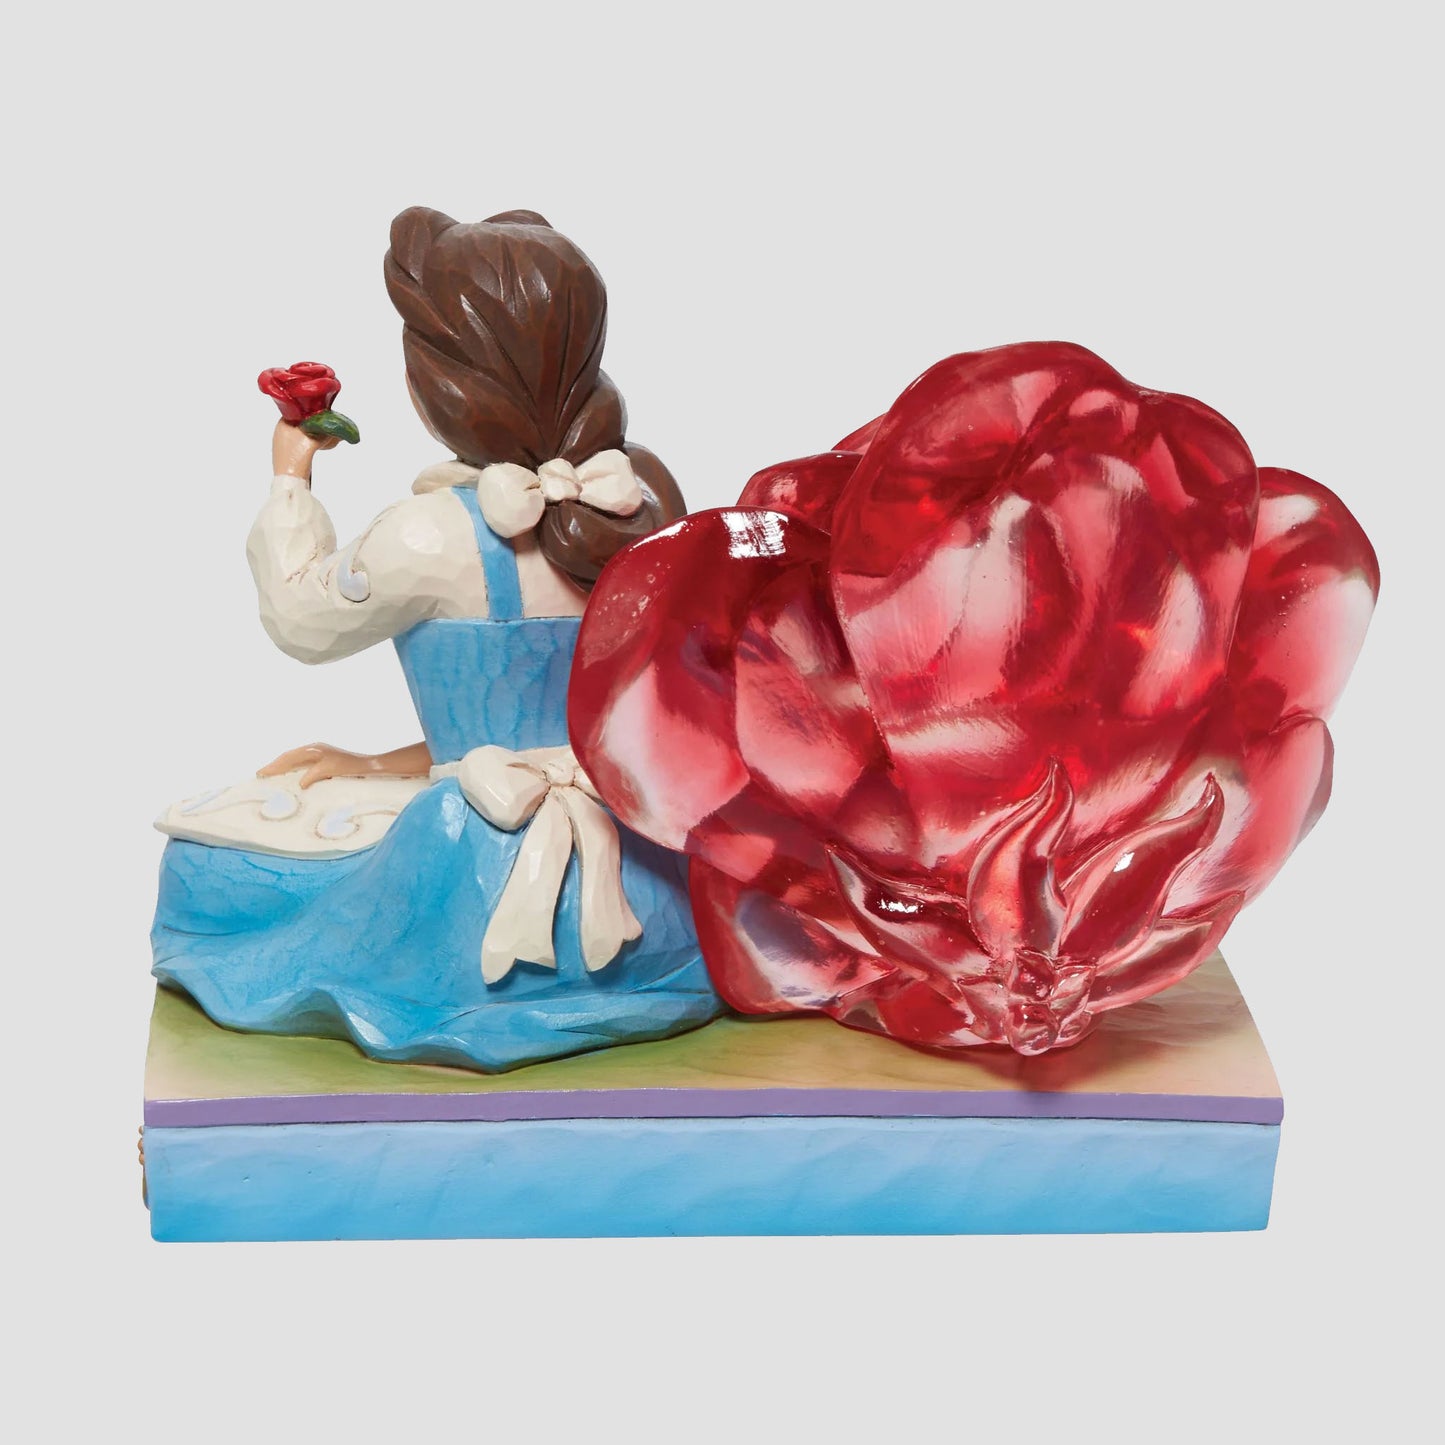 Disney Traditions Beauty & the Beast Figurines by Jim Shore